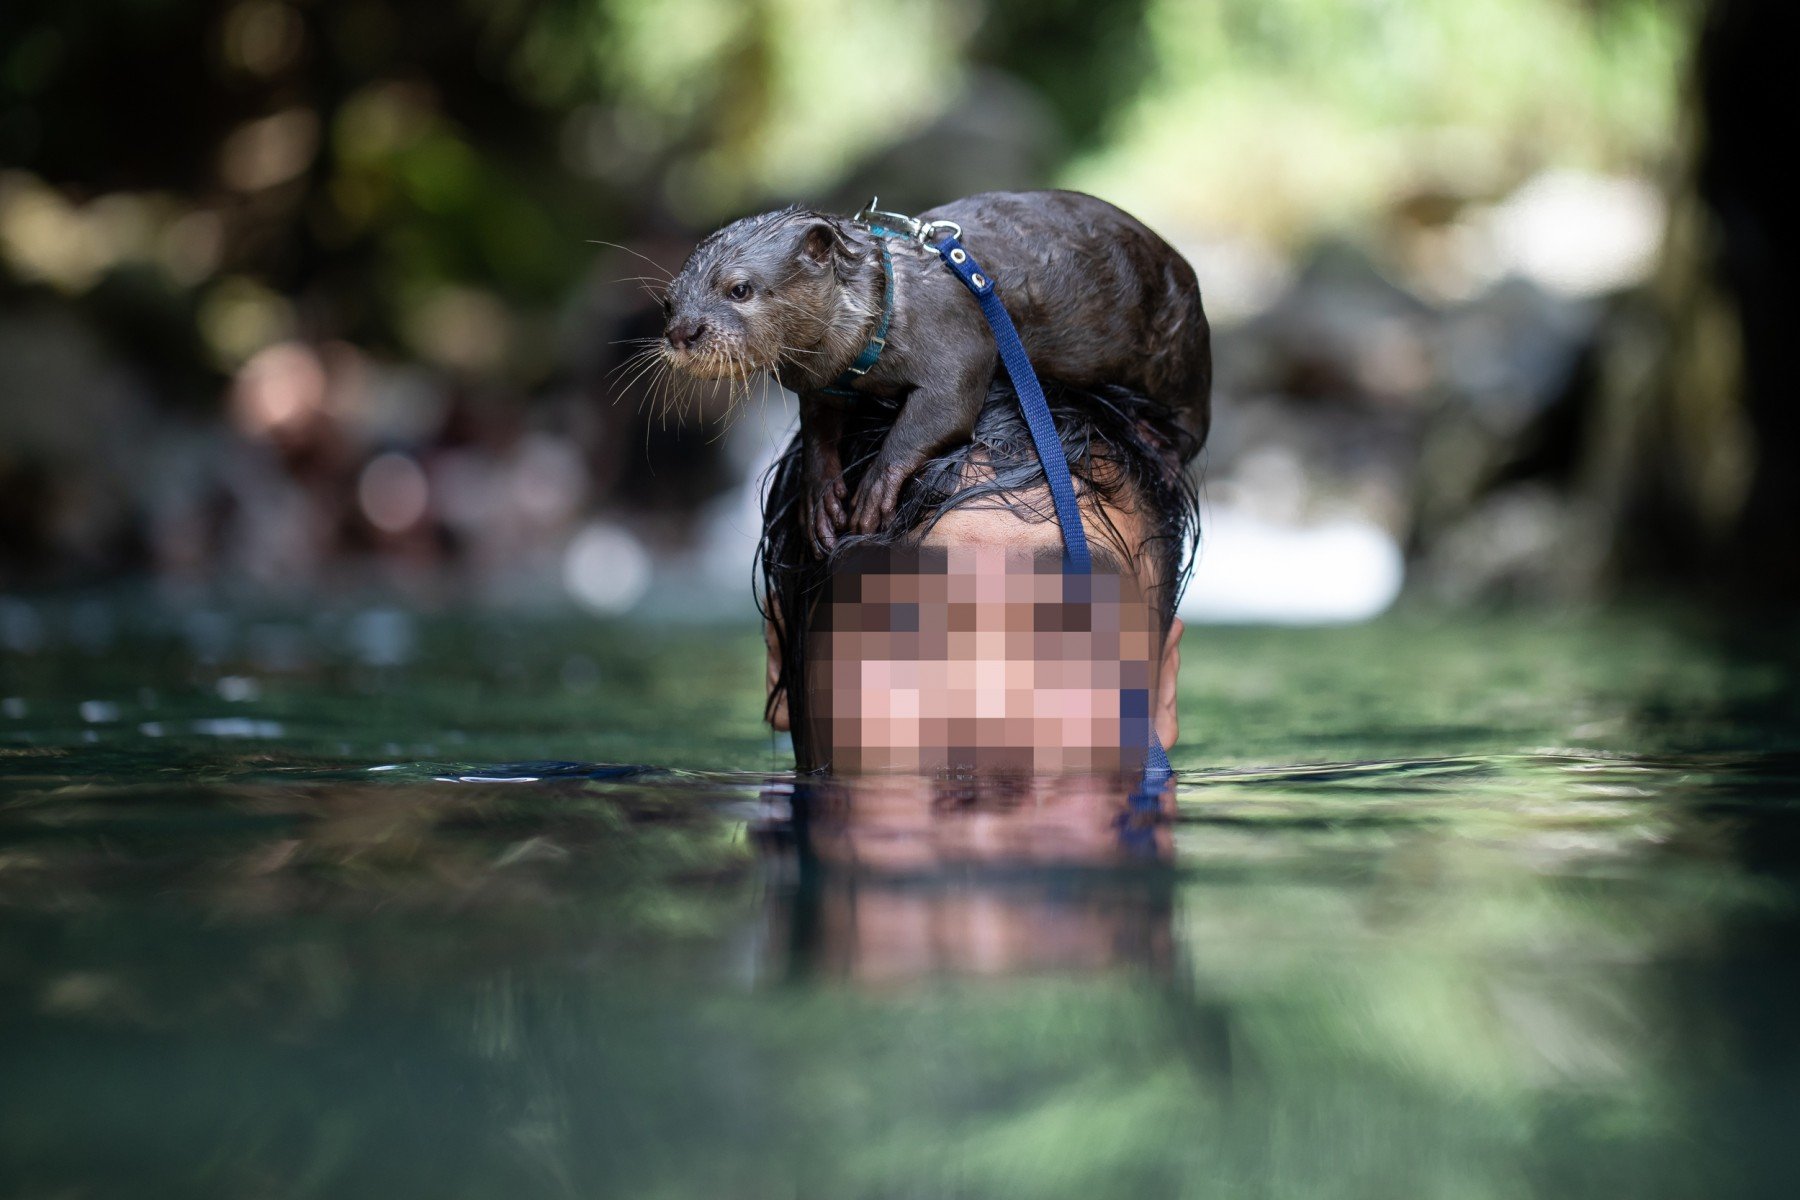 Otter Pet. World animal Protection. Keeping Wild animals as Pets.